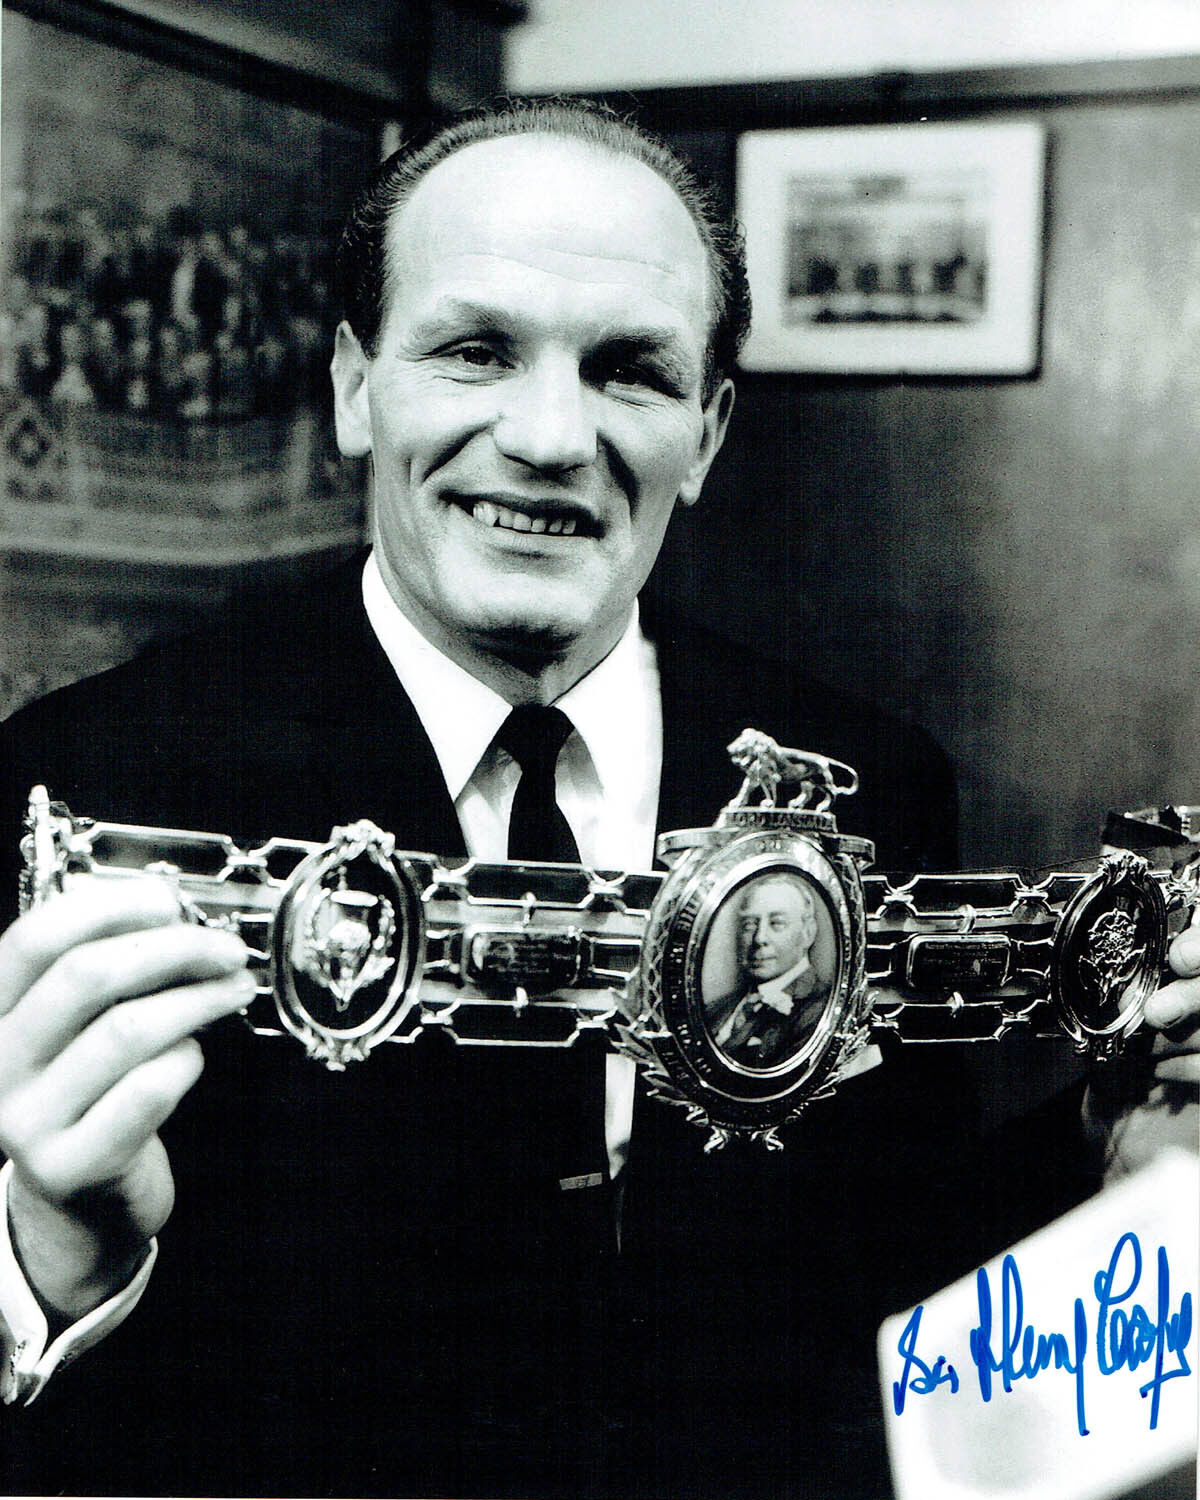 Sir Henry COOPER SIGNED Belts Portrait 10x8 Photo Poster painting AFTAL COA Boxing Champion